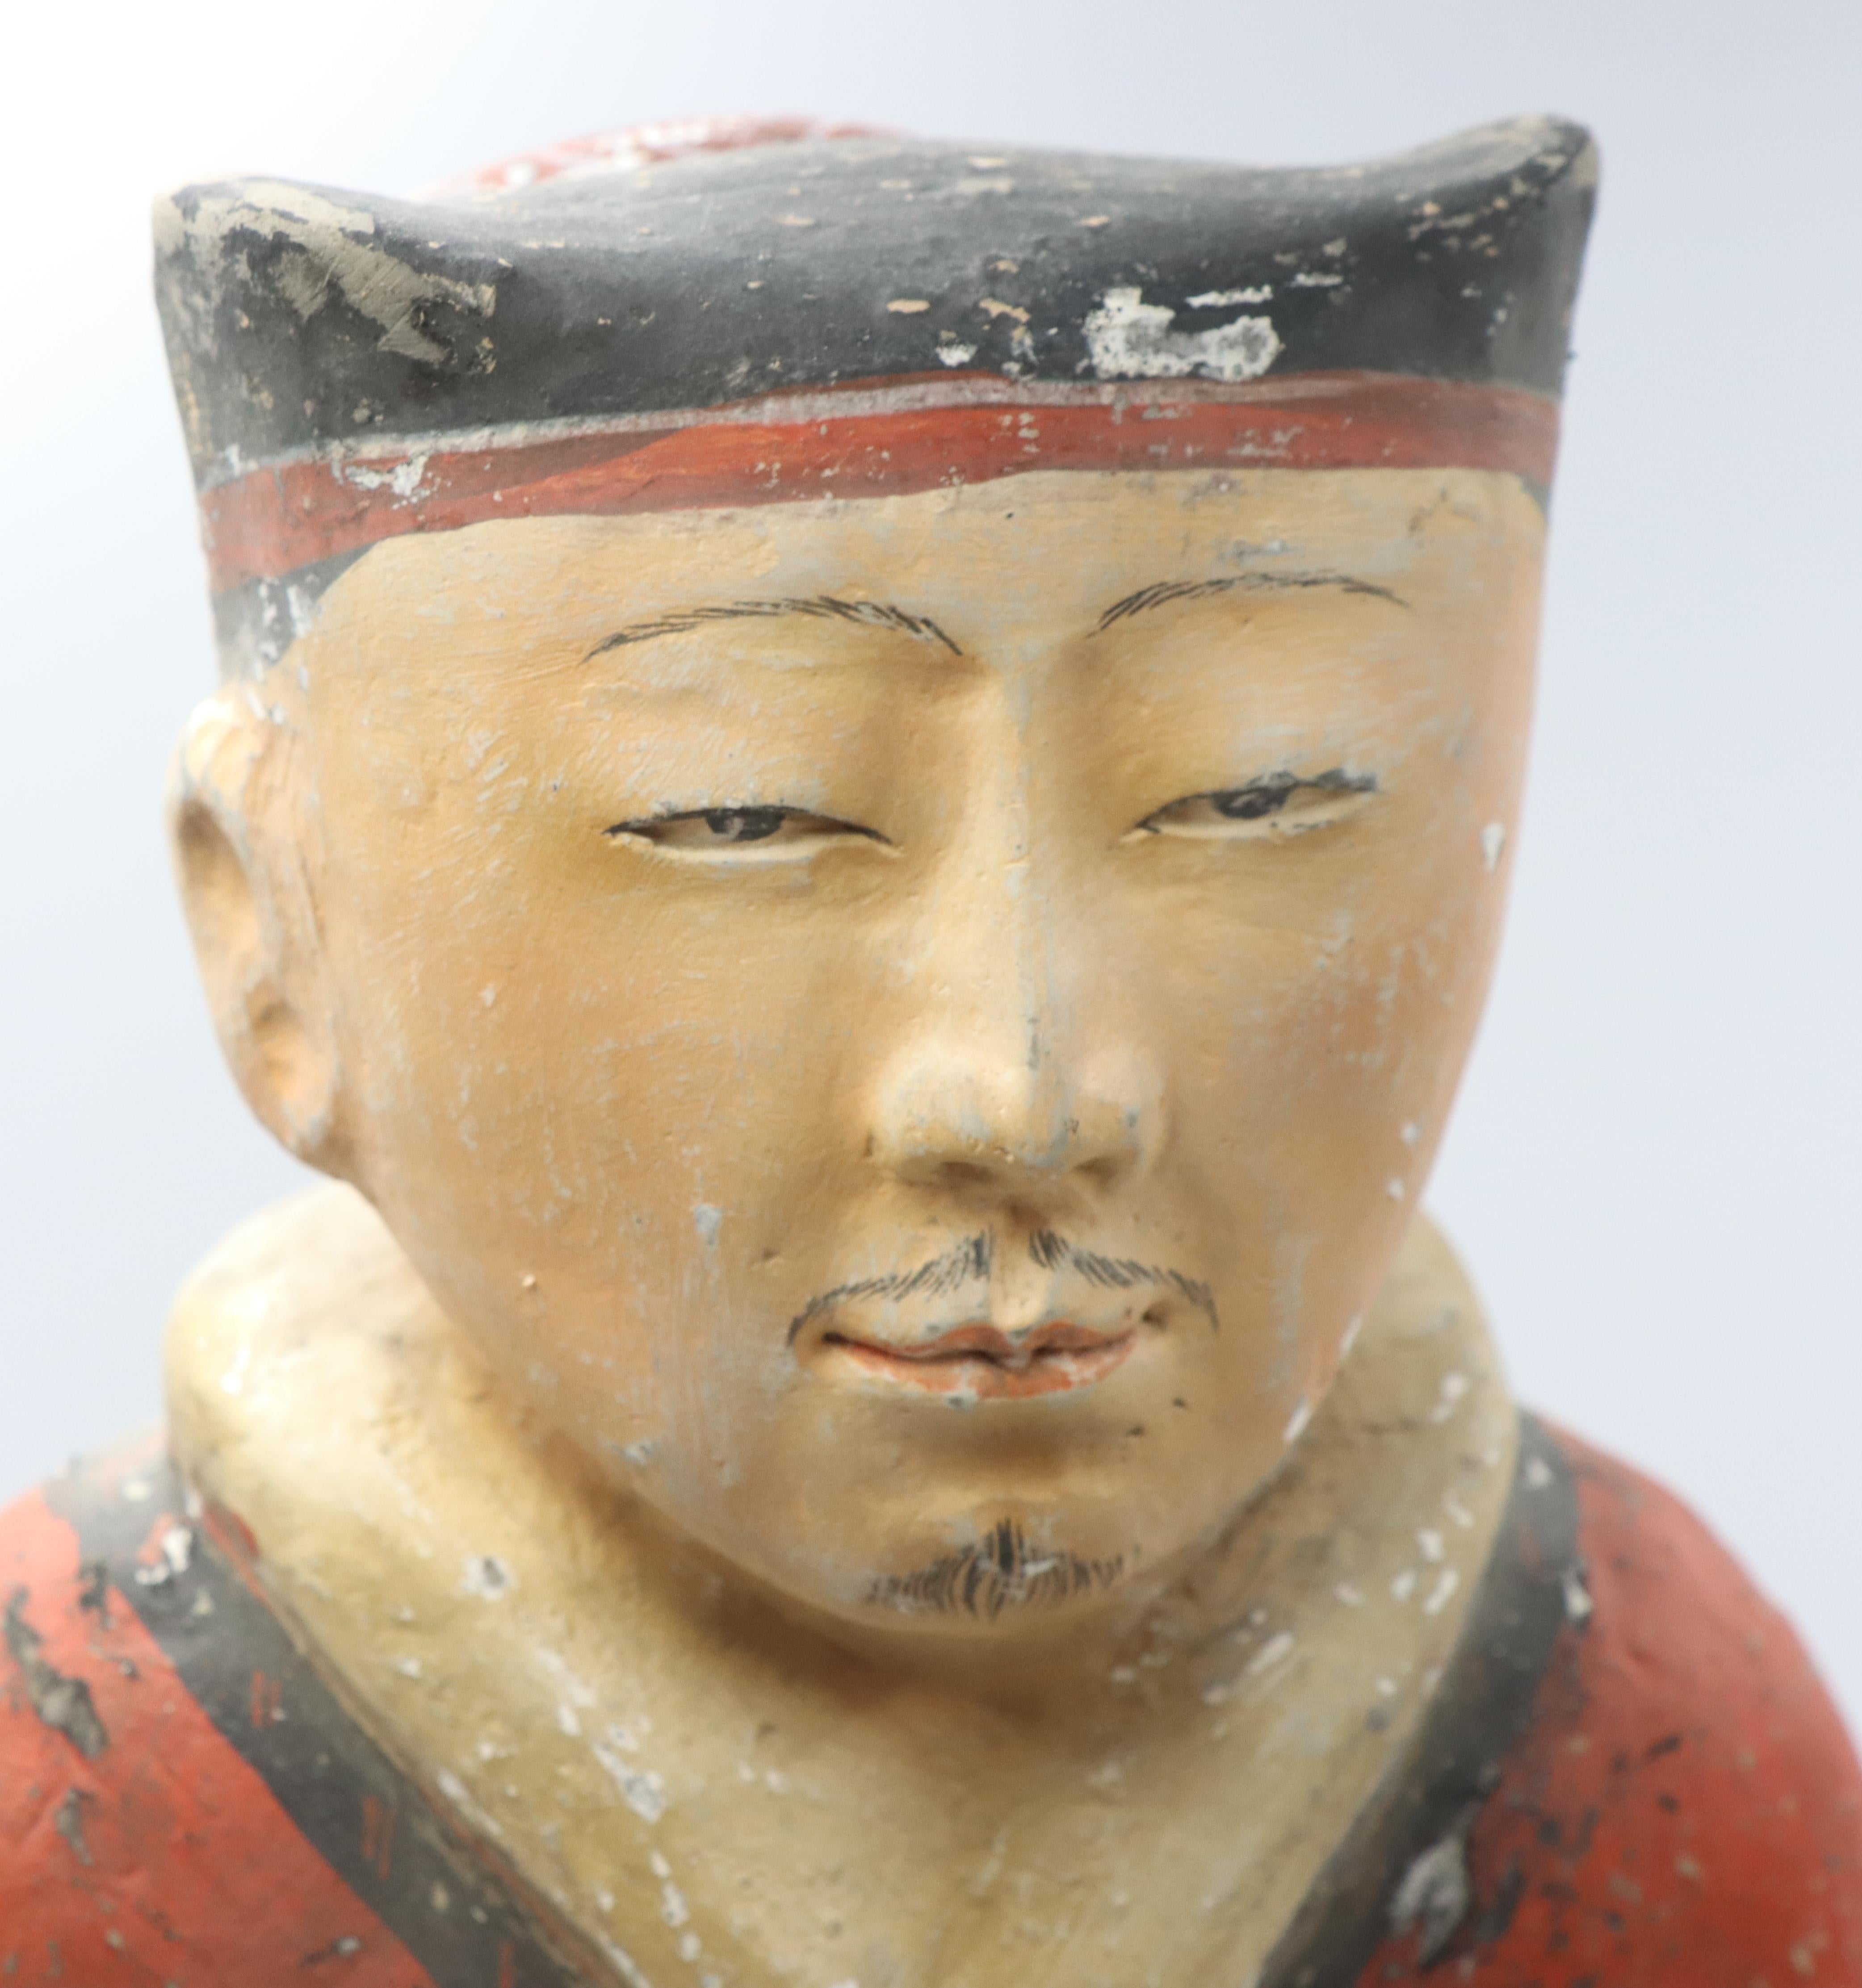 Important pair of rare polychrome Han warriors. These are from the Han Dynasty. Uniquely expressive faces with lots of detail. They have expressive squinted eyes, a small nose, and detailed mouths with some facial hair on the upper lip, as well as